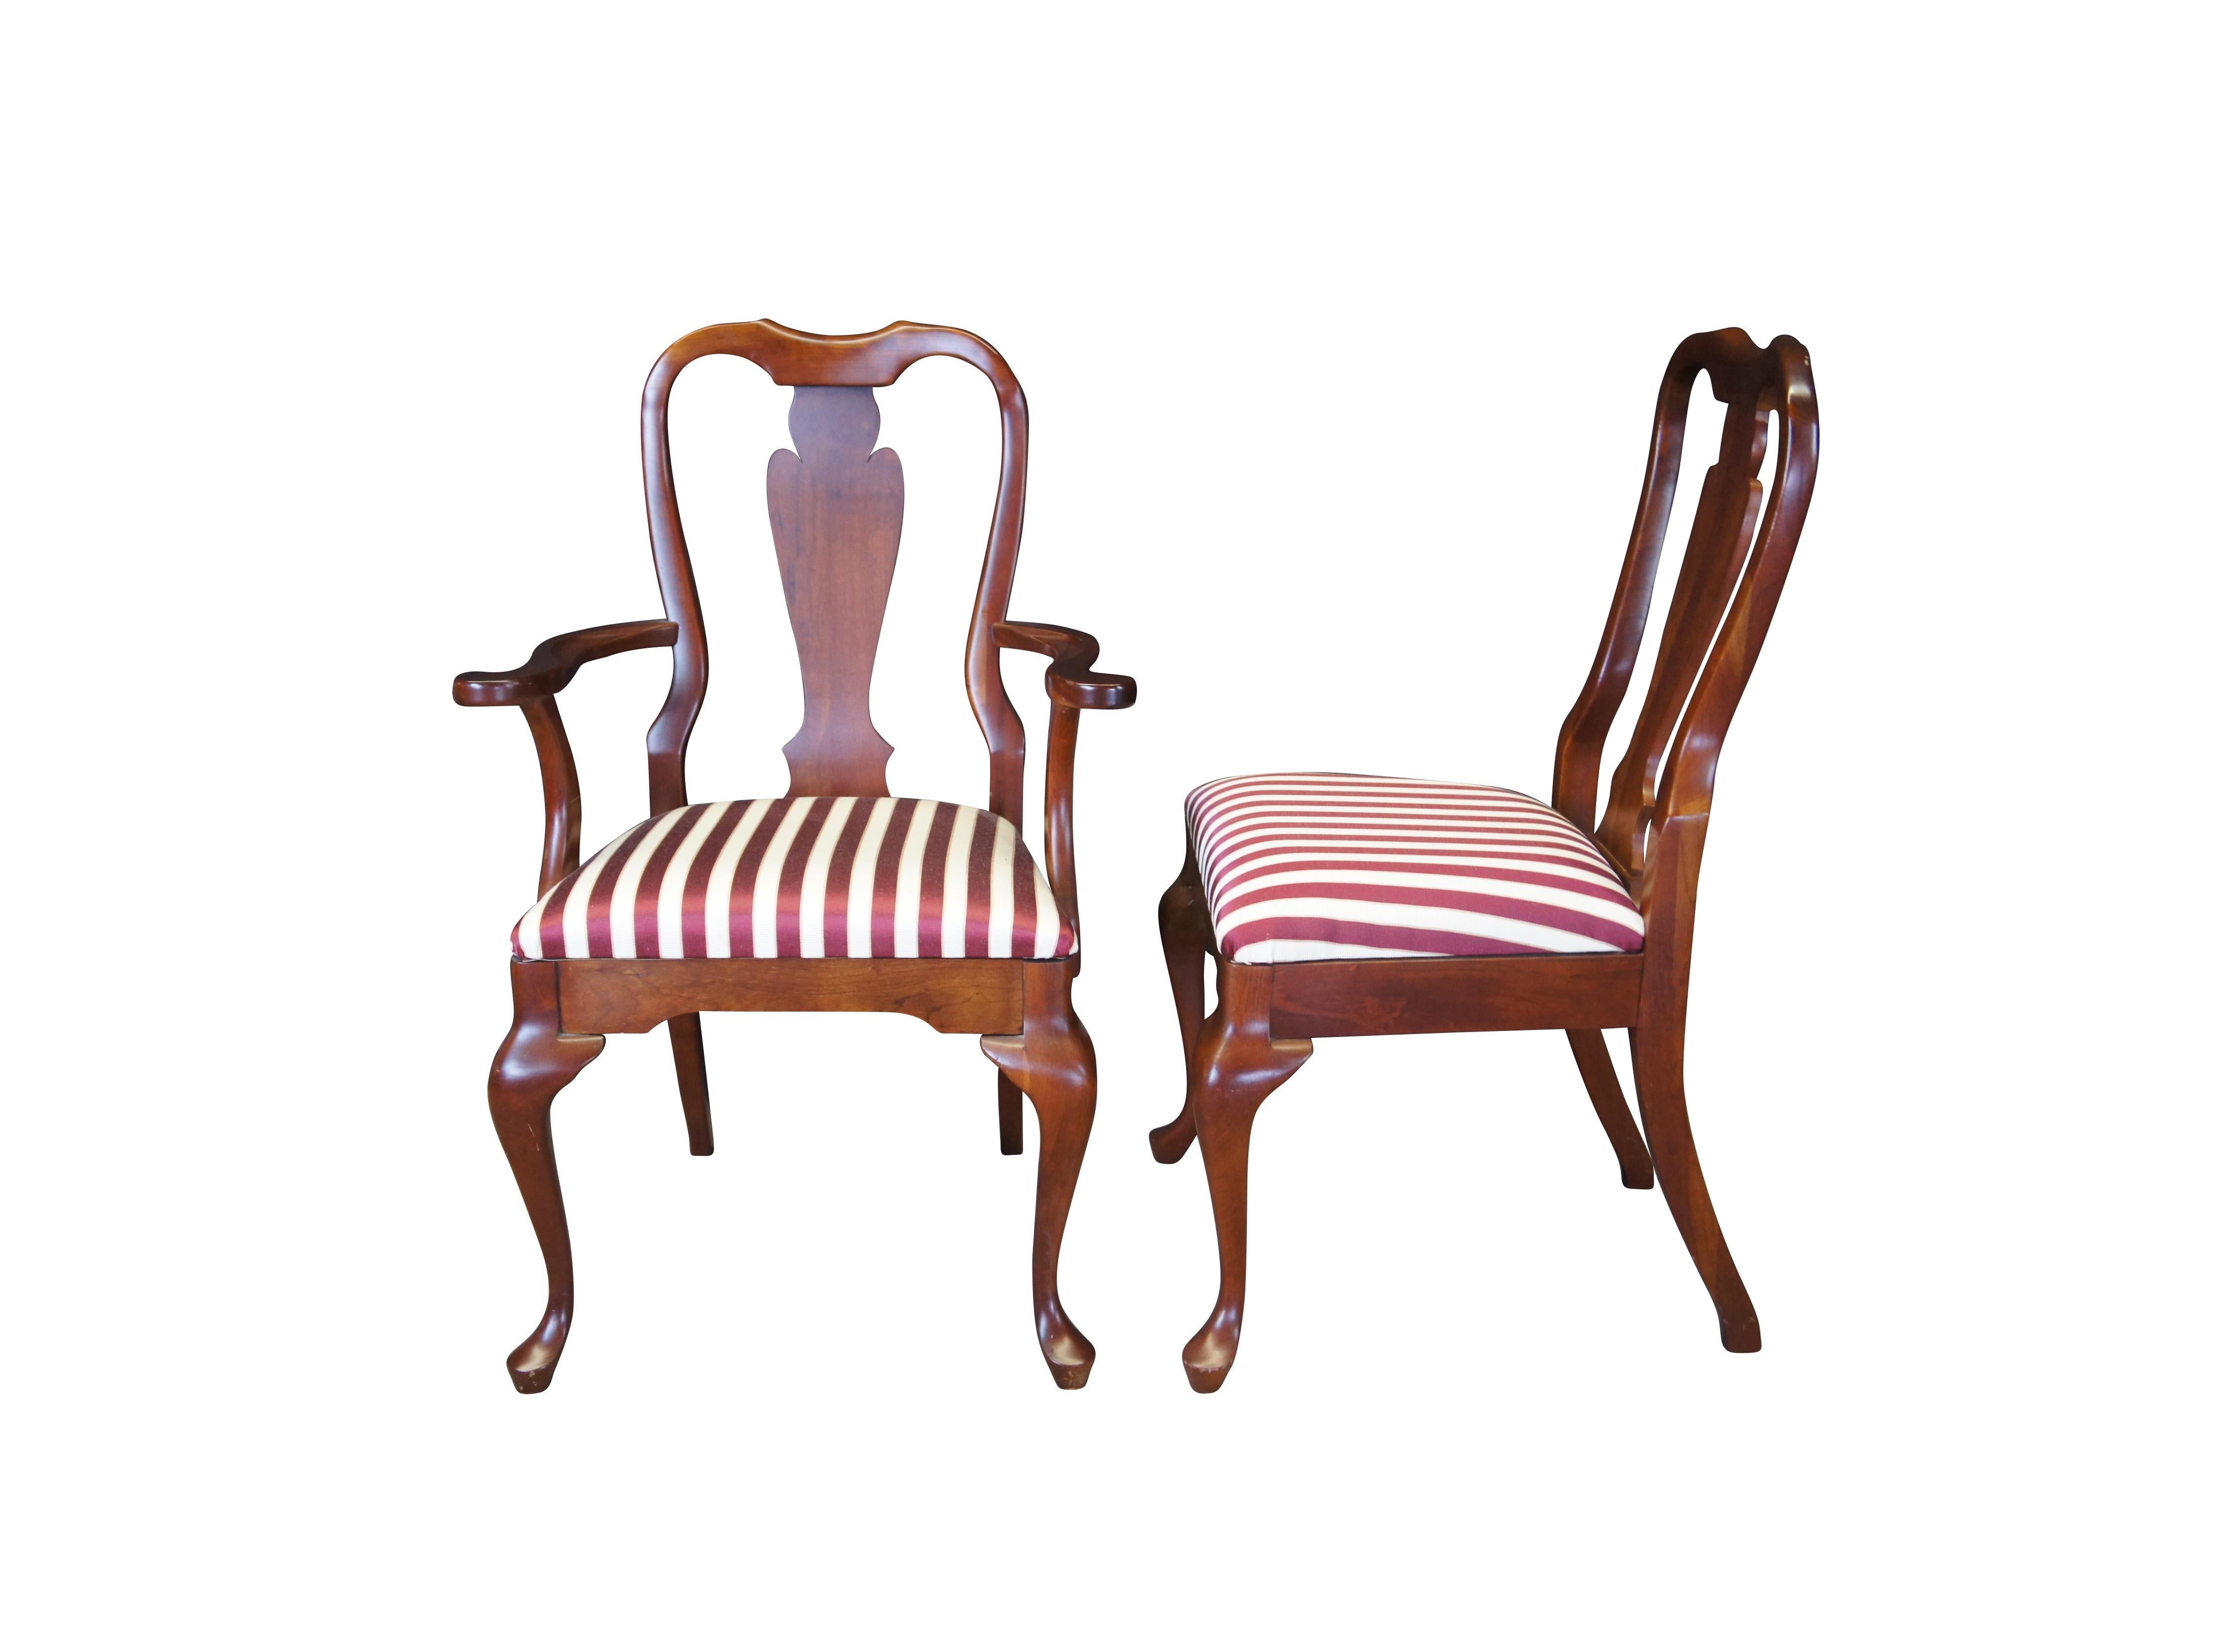 A lovely set of 6 dining chairs by Cresent Manufacturing Company, circa 1970s. Made from Cherry in classic Queen Anne styling. Features a contoured crest rail over vase shaped splat leading to striped upholstery over cabriole legs. No 8320 & 8320